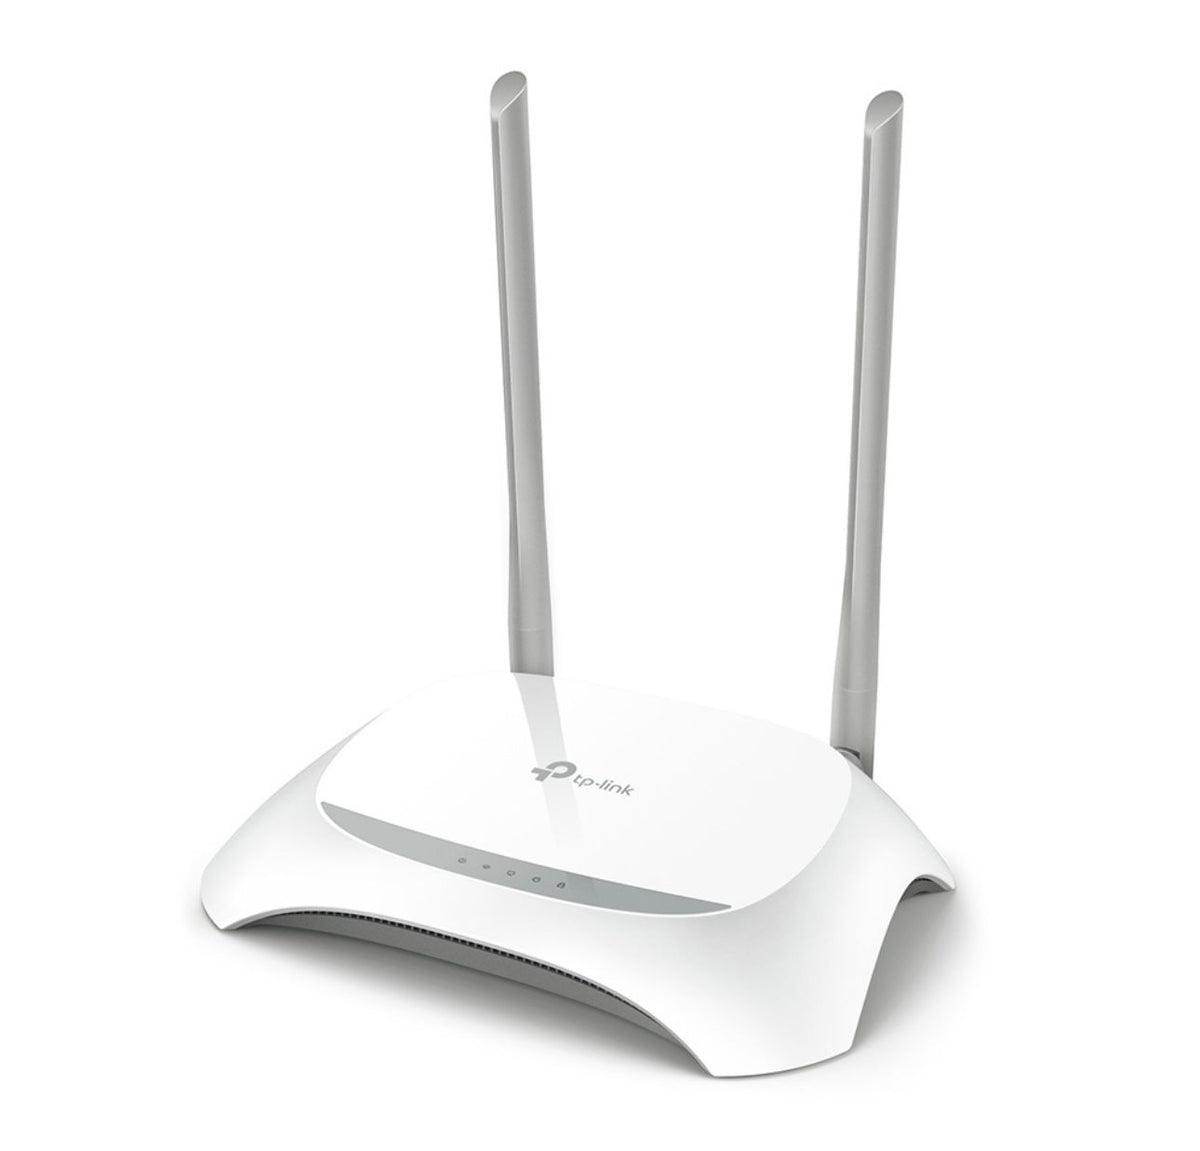 ROUTER INALAMBRICO TP-LINK TL-WR850N 2.4-2.4835GHZ N300 2 ANTENAS-WSP (TL-WR850N)